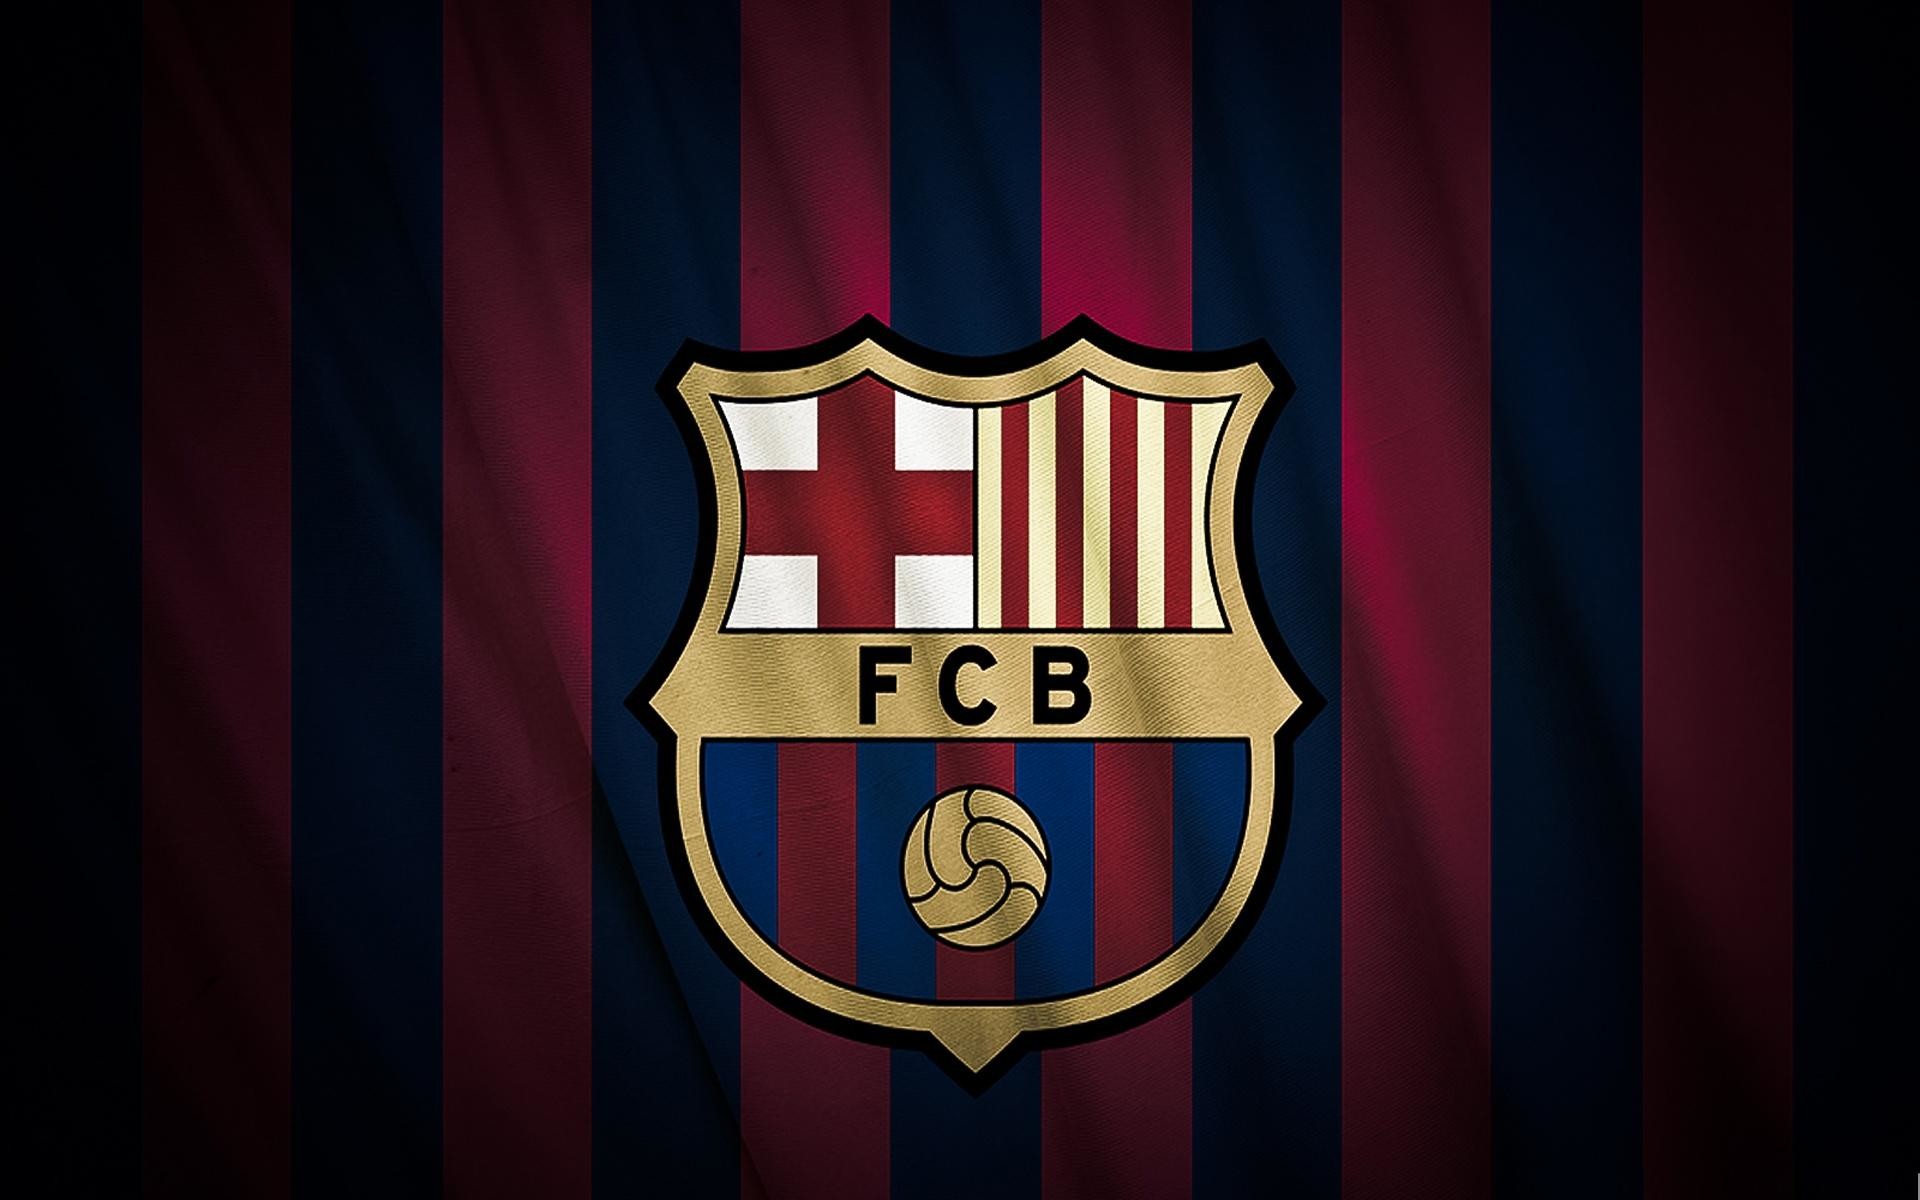 1920x1200 Widescreen Wallpapers of Barcelona Â» Super Images